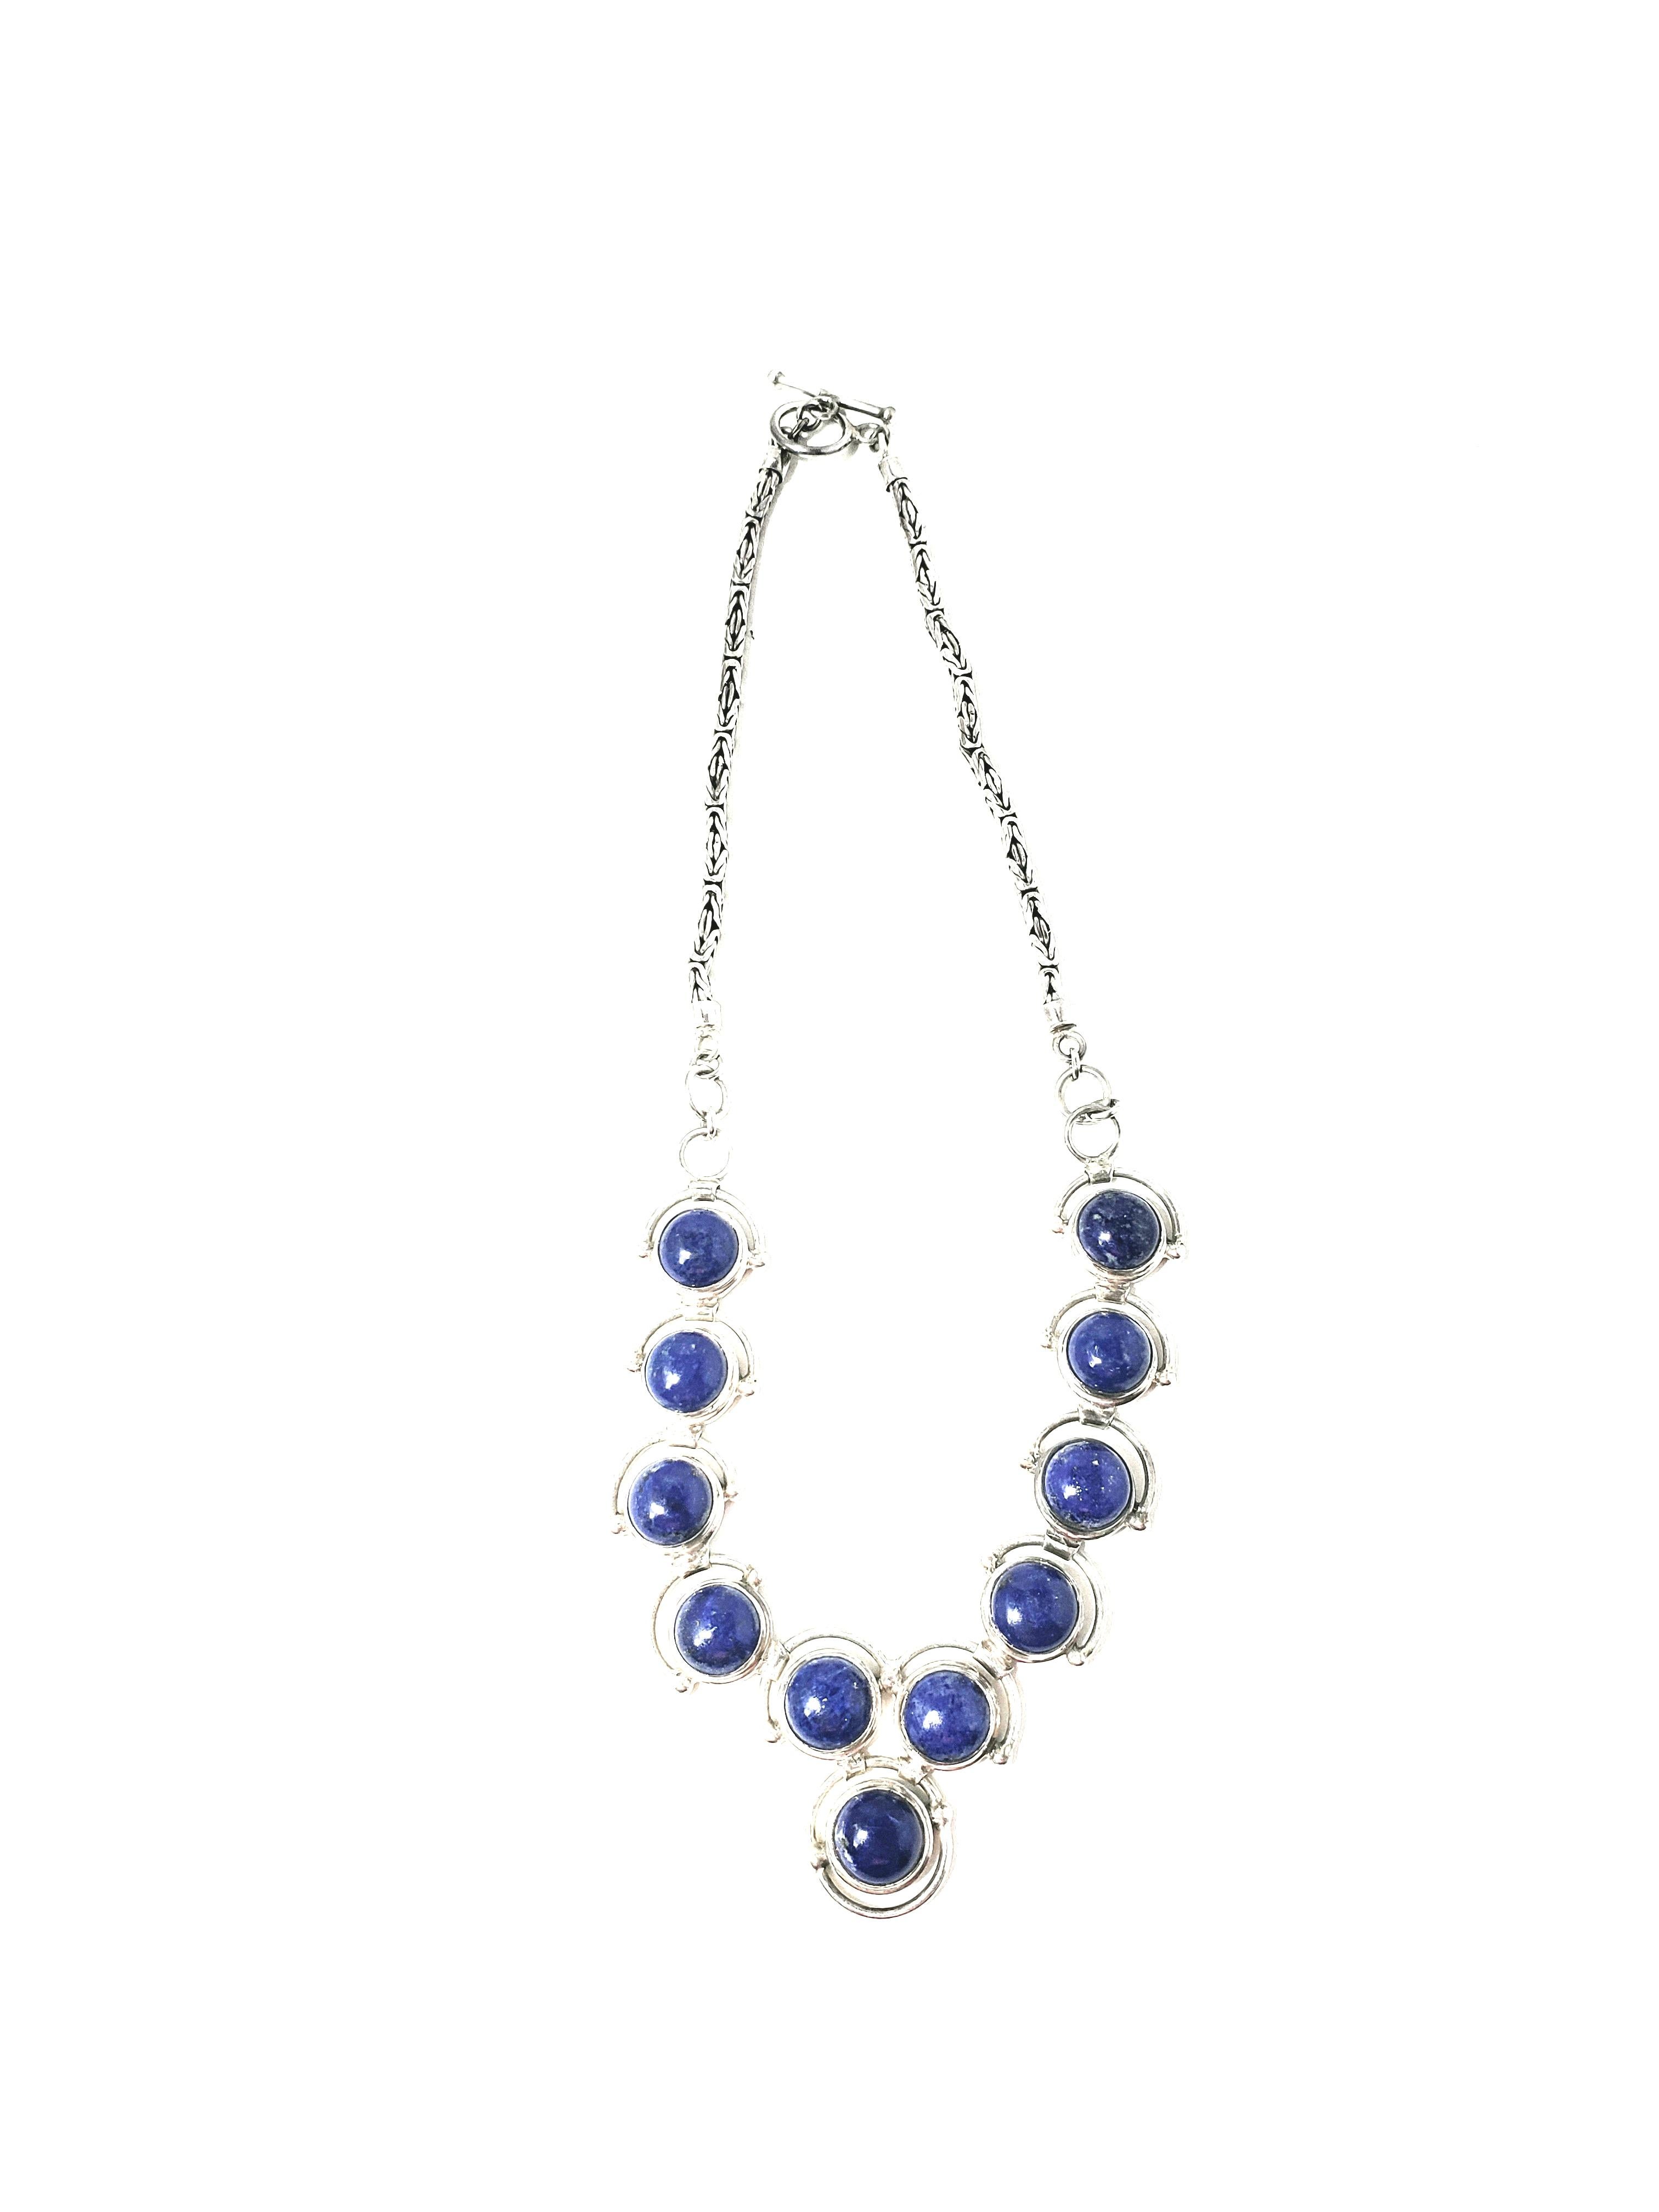 Sterling Silver Cabochon Lapis Lazuli Link Necklace

This is a stunning sterling silver cabochon lapis lazuli link necklace.  

Measurements:     Measures 17 inches.  8mm thick.  11 stones that measure 10mm.  
 
Weight:  52.6 g /  33.8 dwt  